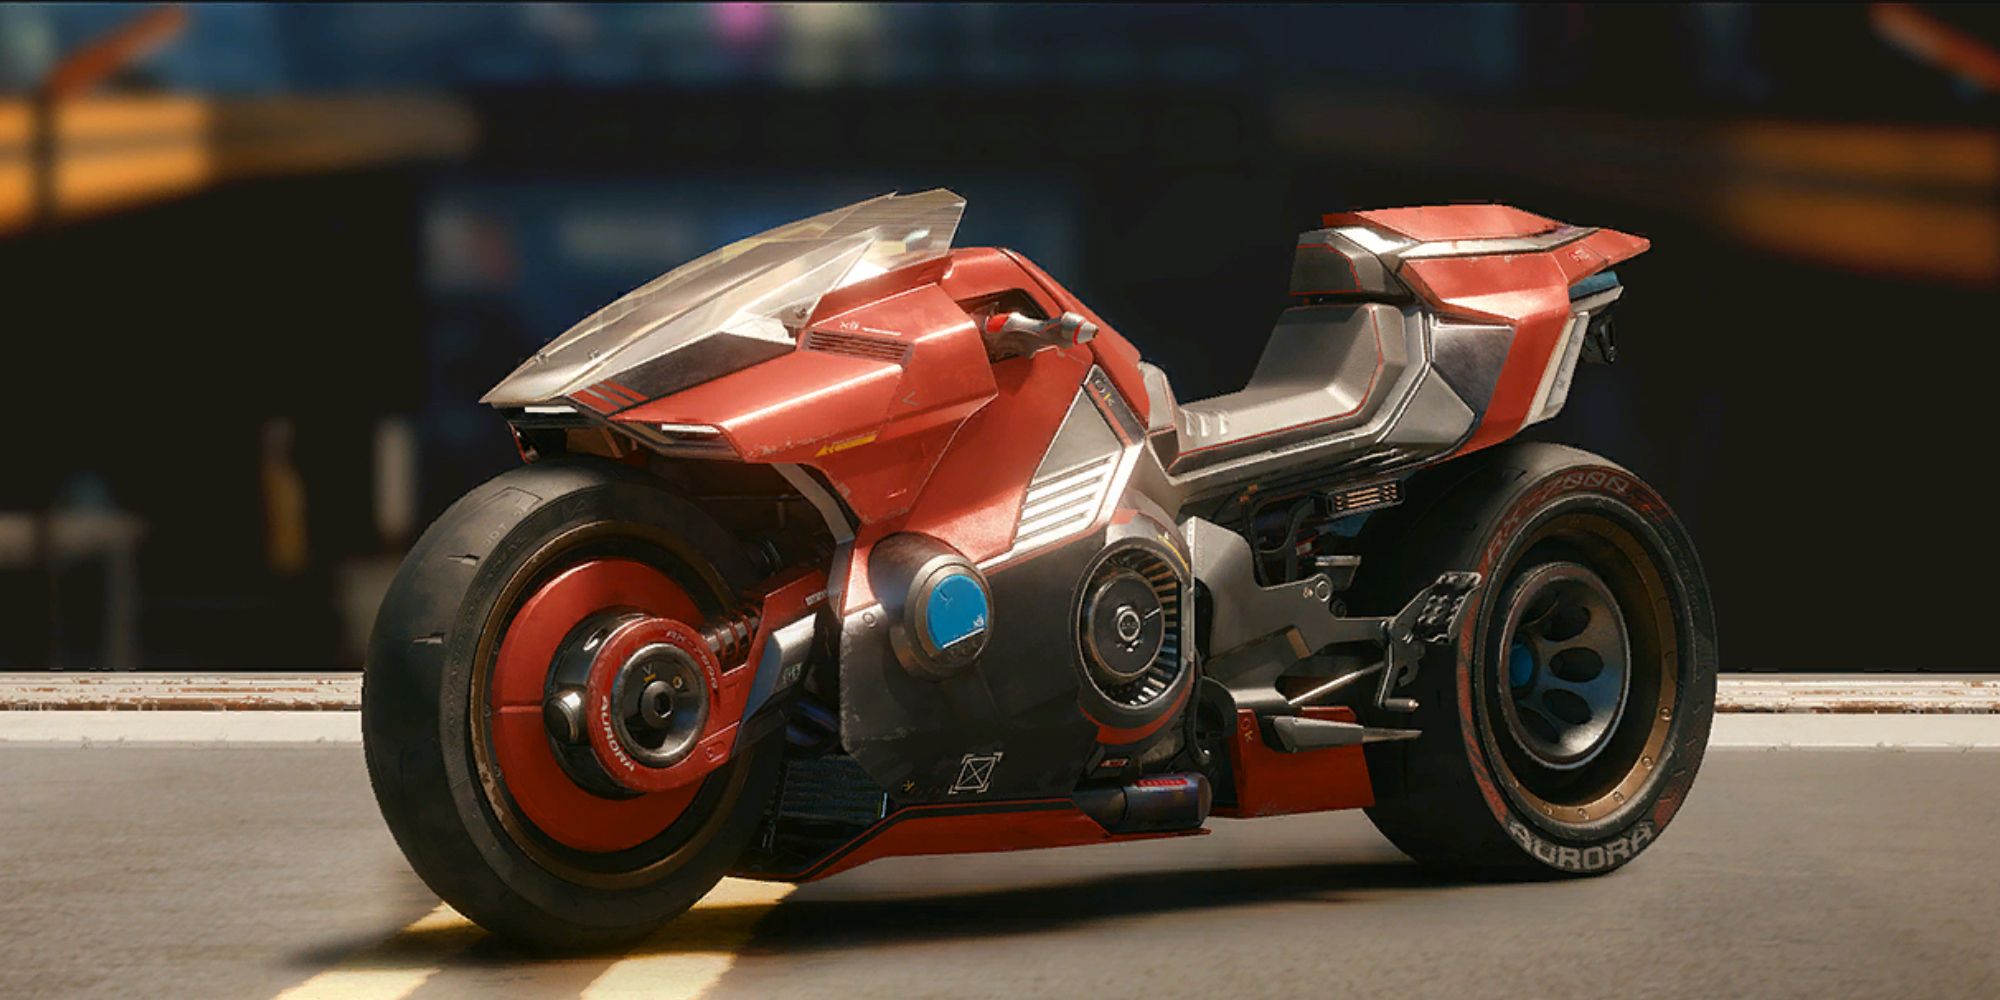 Best Vehicles a close up of the Yaiba Kusanagi CT-3X bike from Cyberpunk 2077 against an out of focus backdrop